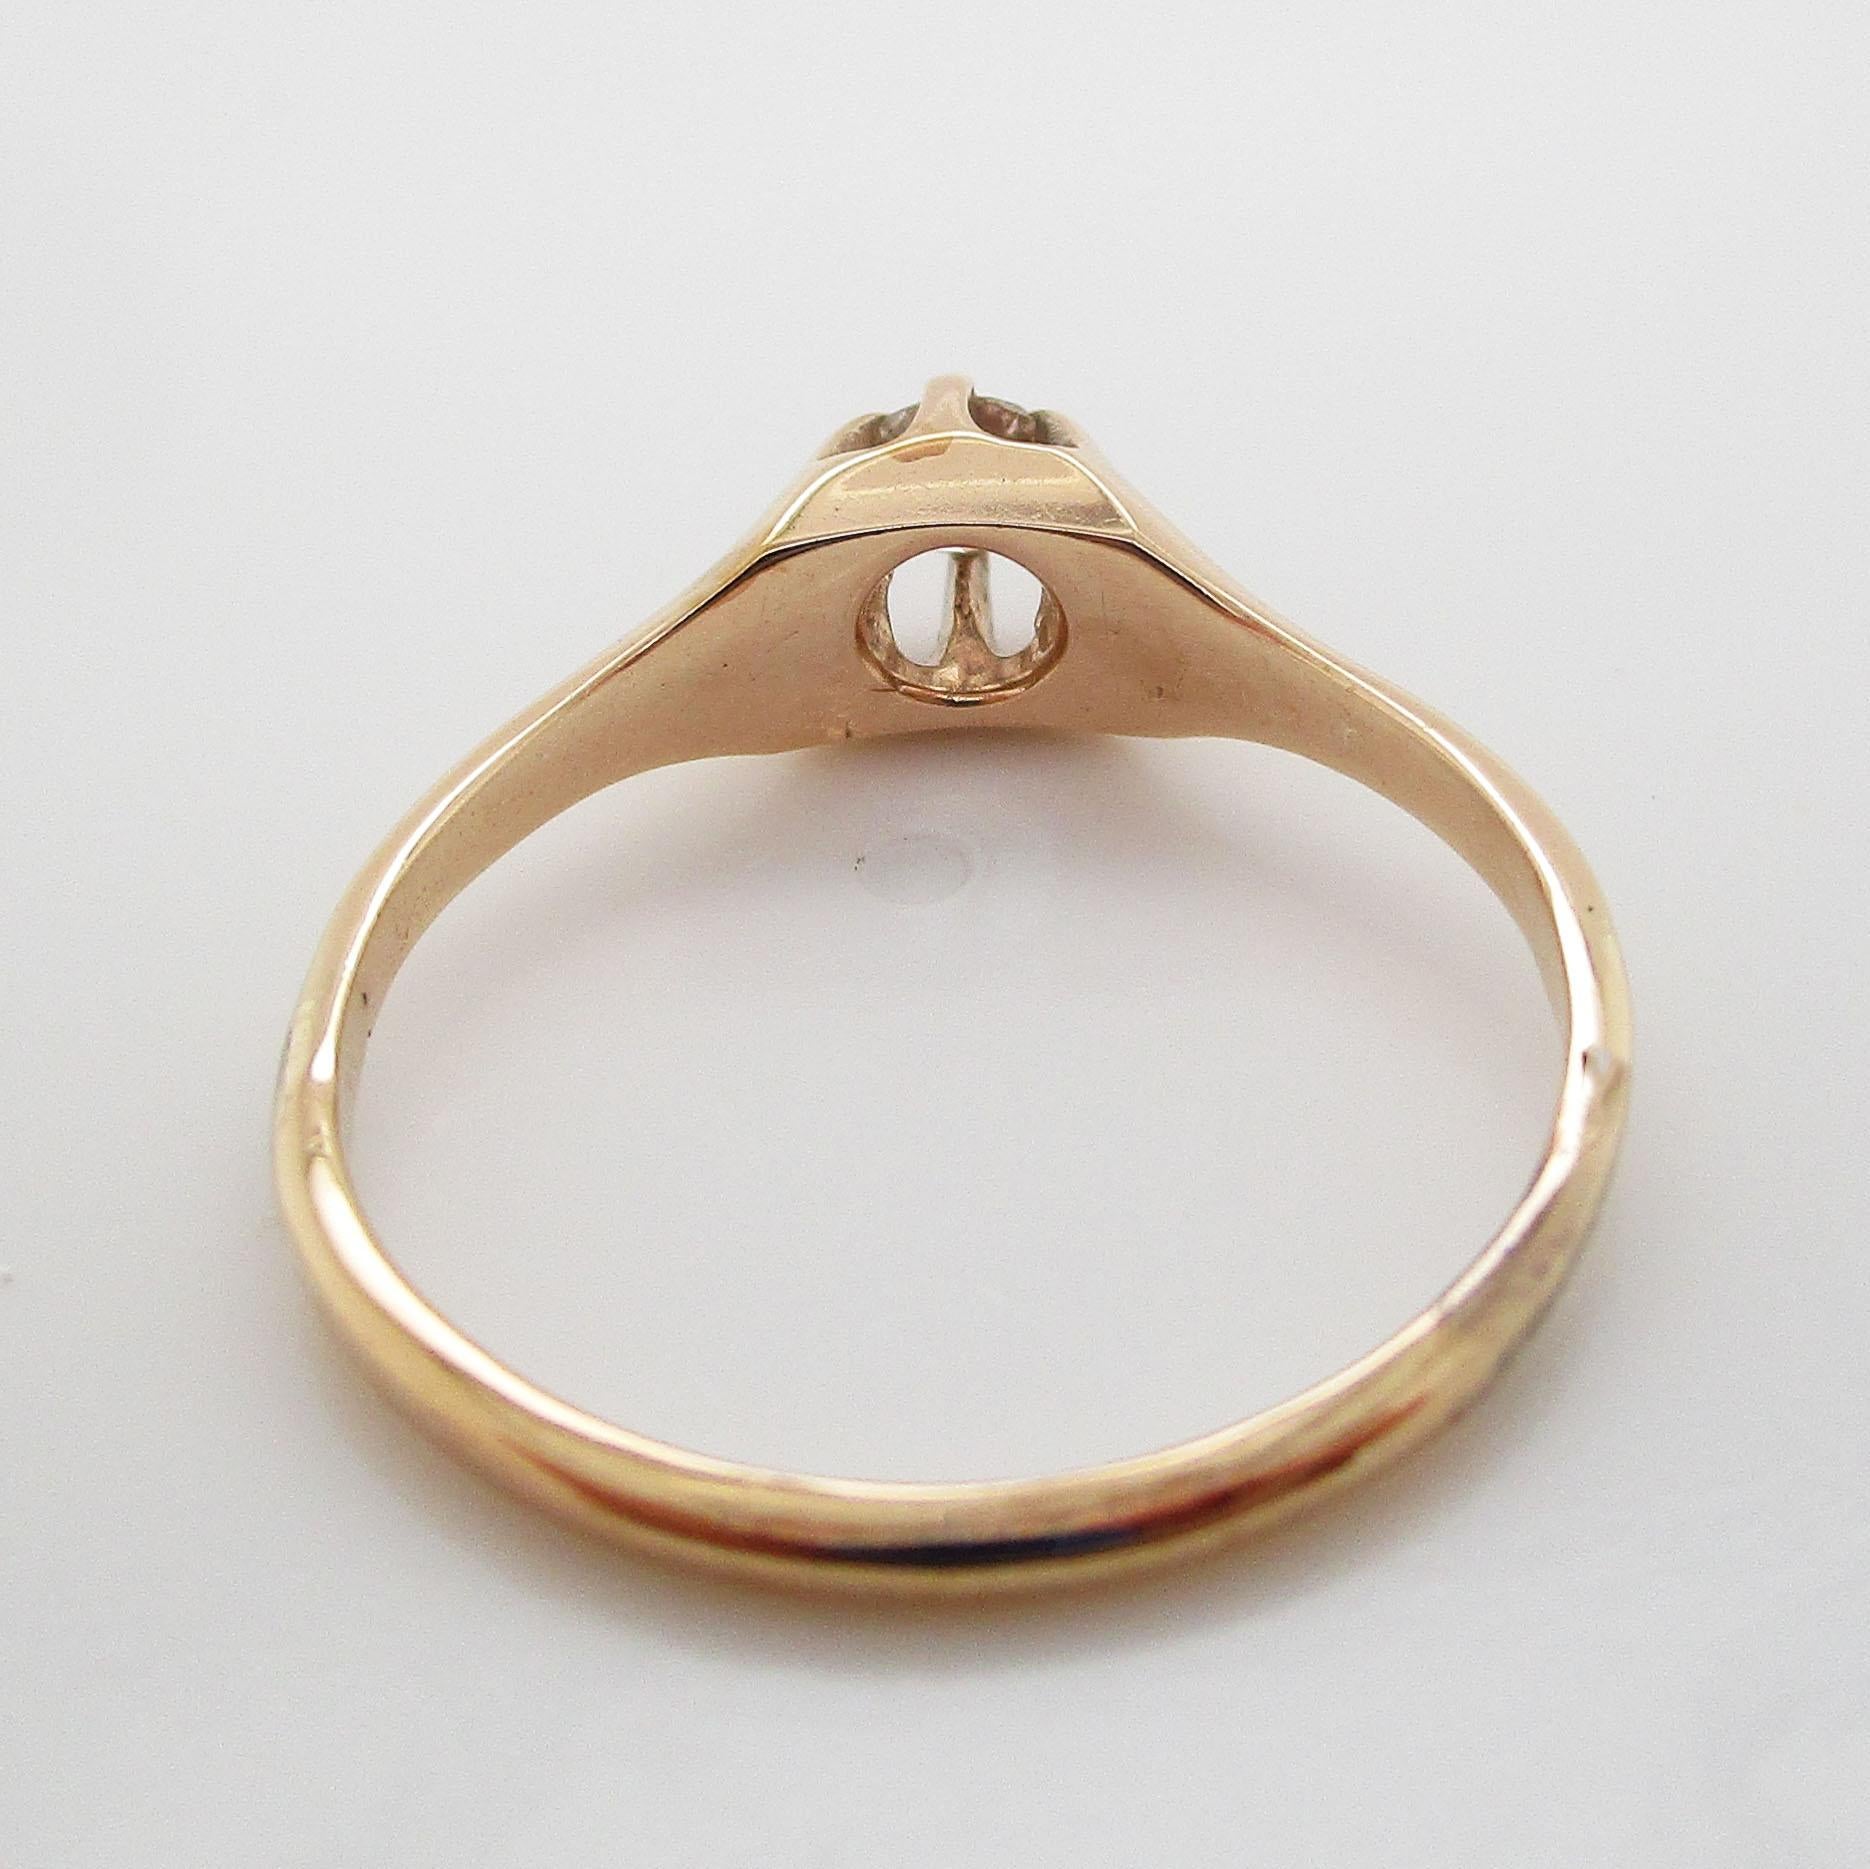 Late Victorian 1890 Victorian 14K Rose Gold Old Mine Cut Diamond Ring For Sale